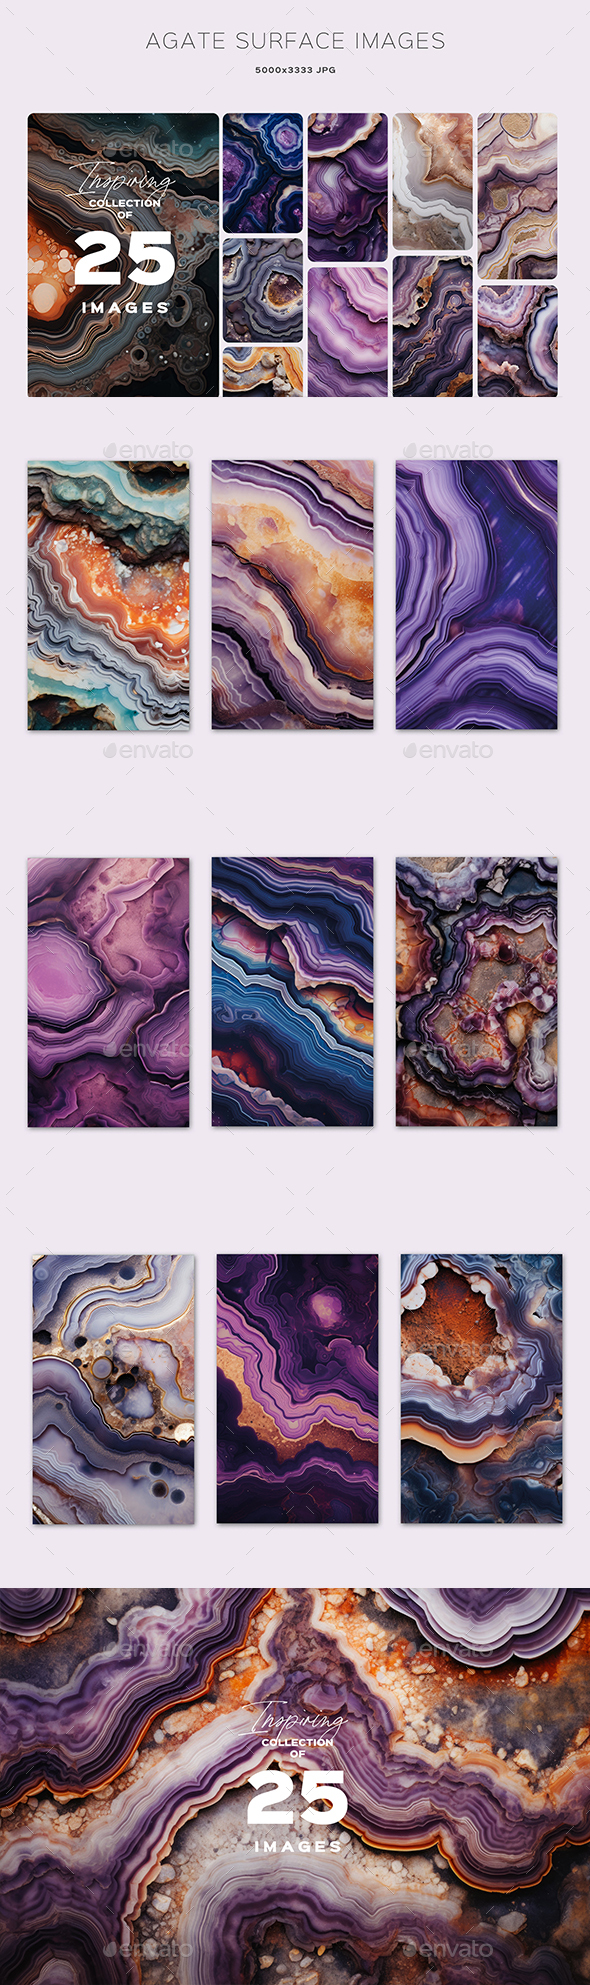 Agate Surface Images